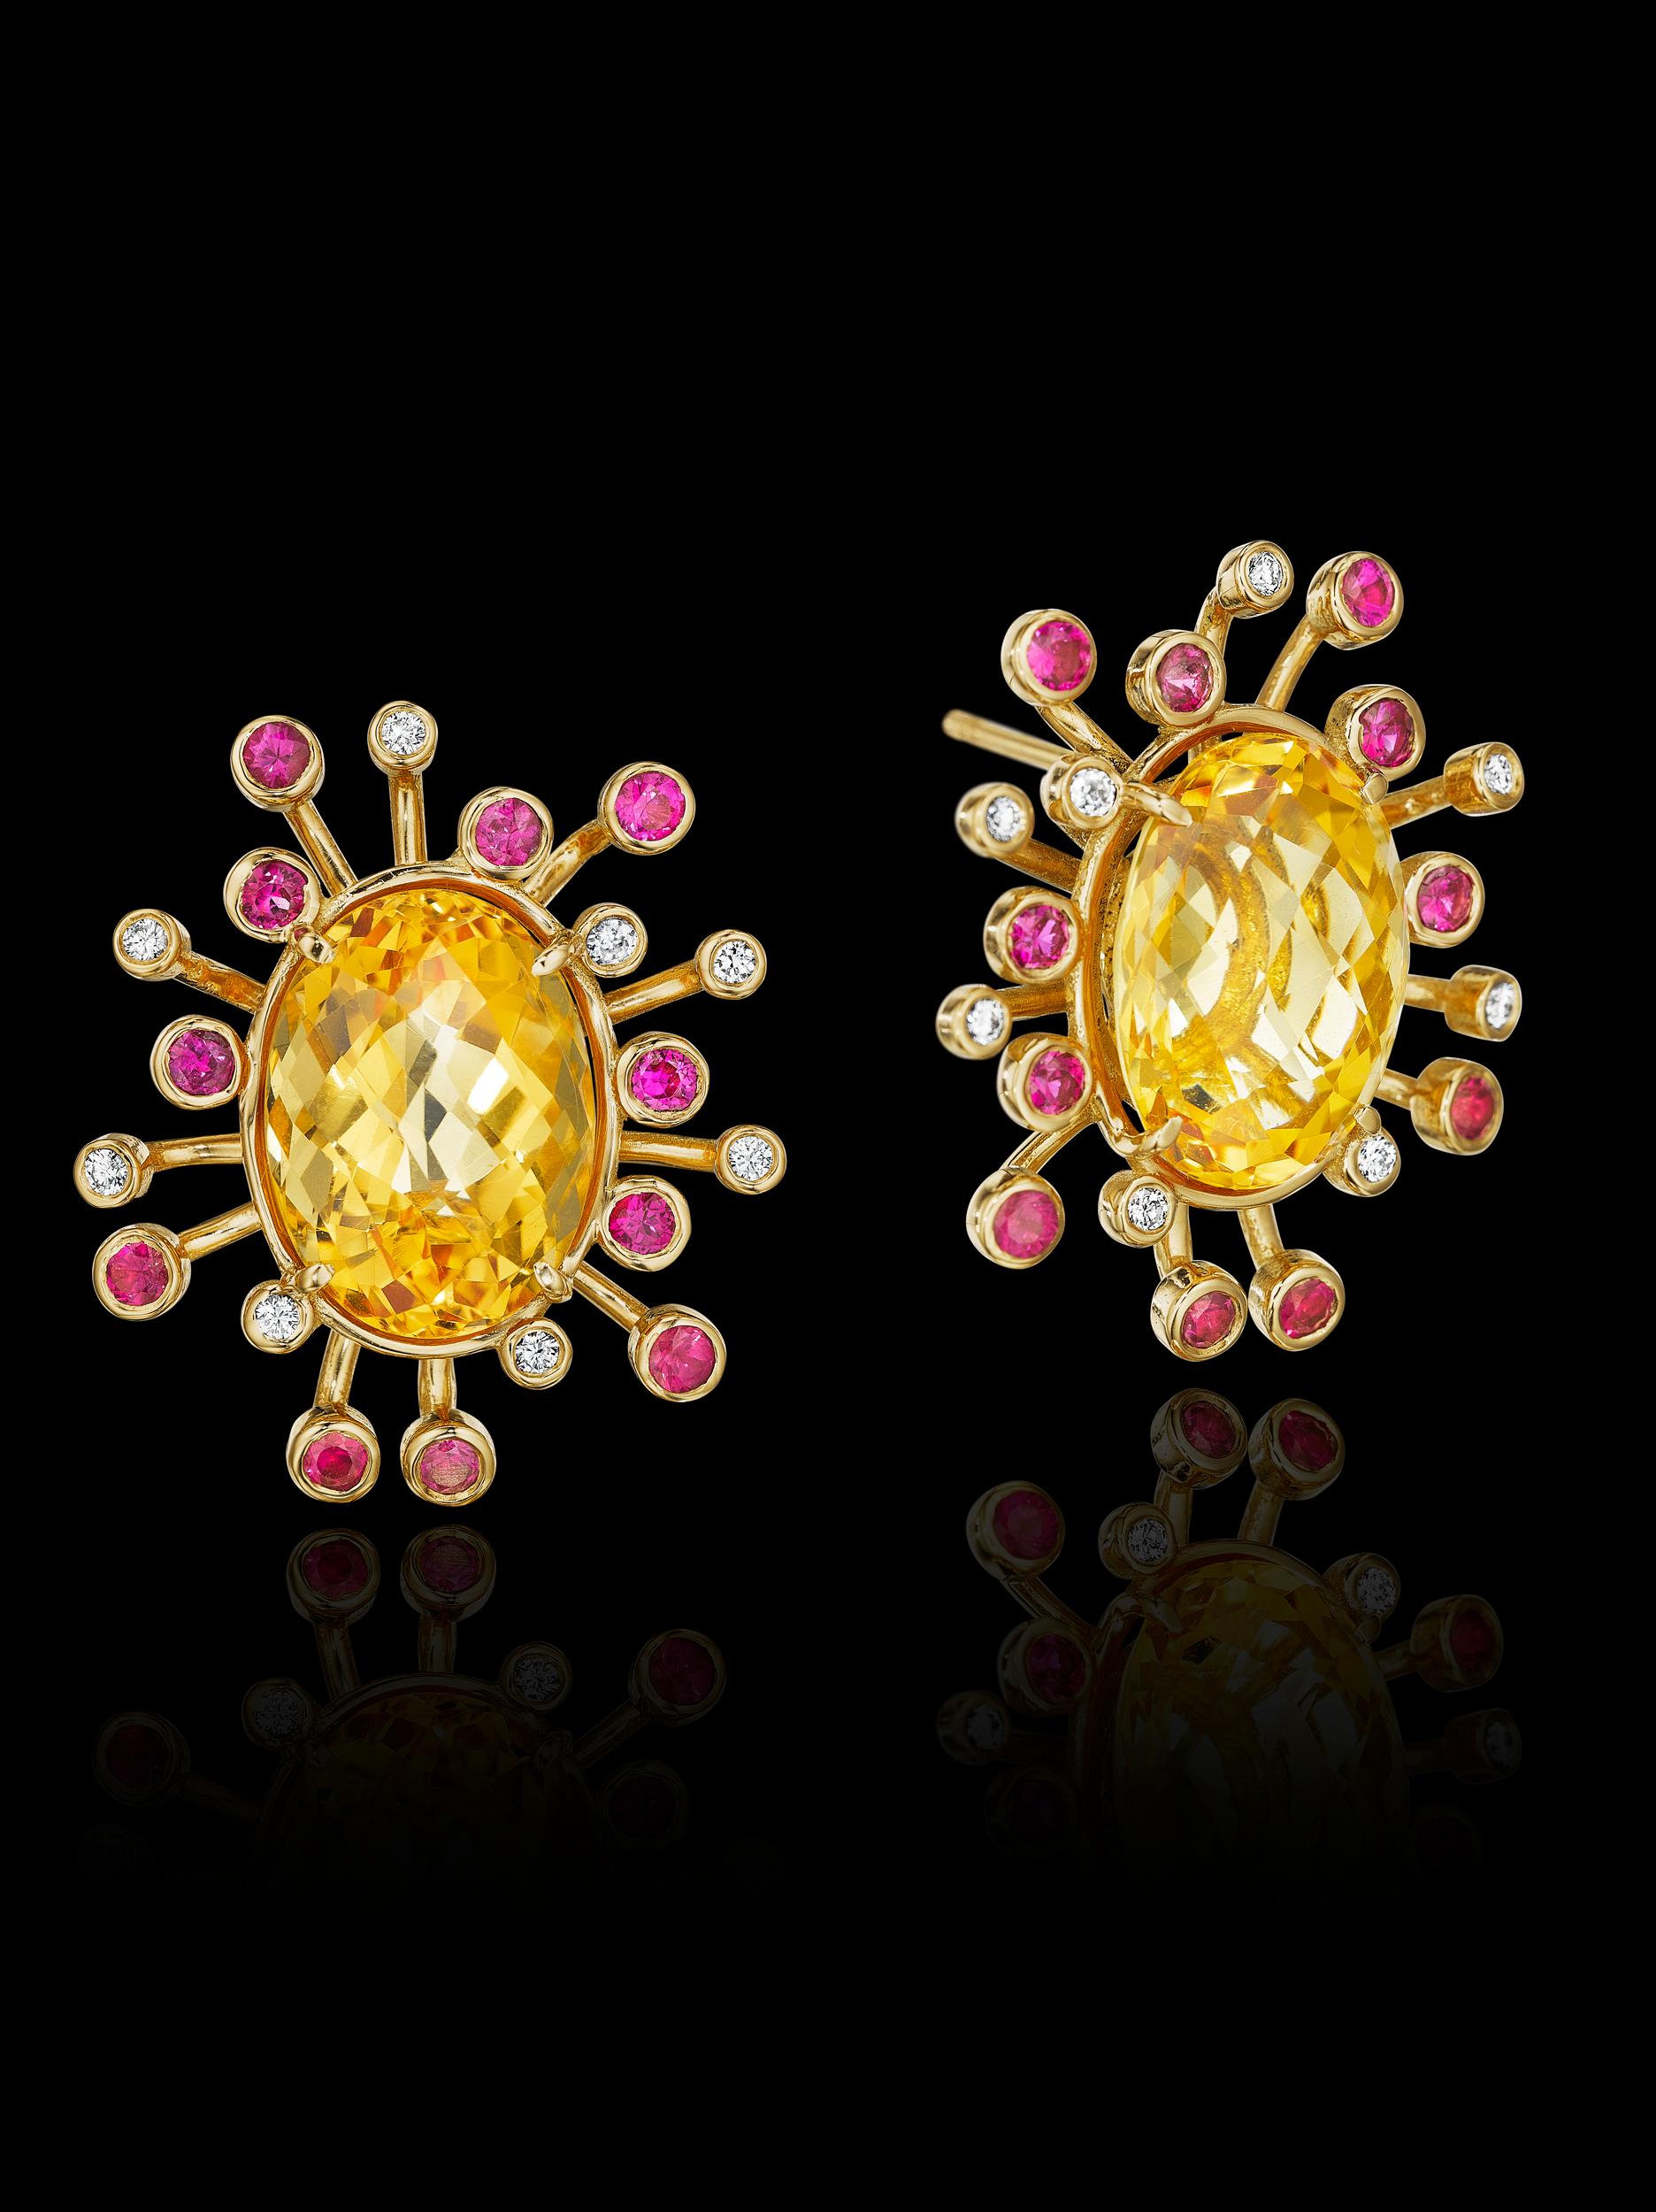 One-of-a-kind YOKI design, this pair of earring features Citrine, Pink Sapphires and Diamonds. From Pure Life Series 4 Collection, inspired by eucalyptus flower buds, statement earrings set in 18k yellow gold. 

Center Stones total carats, each